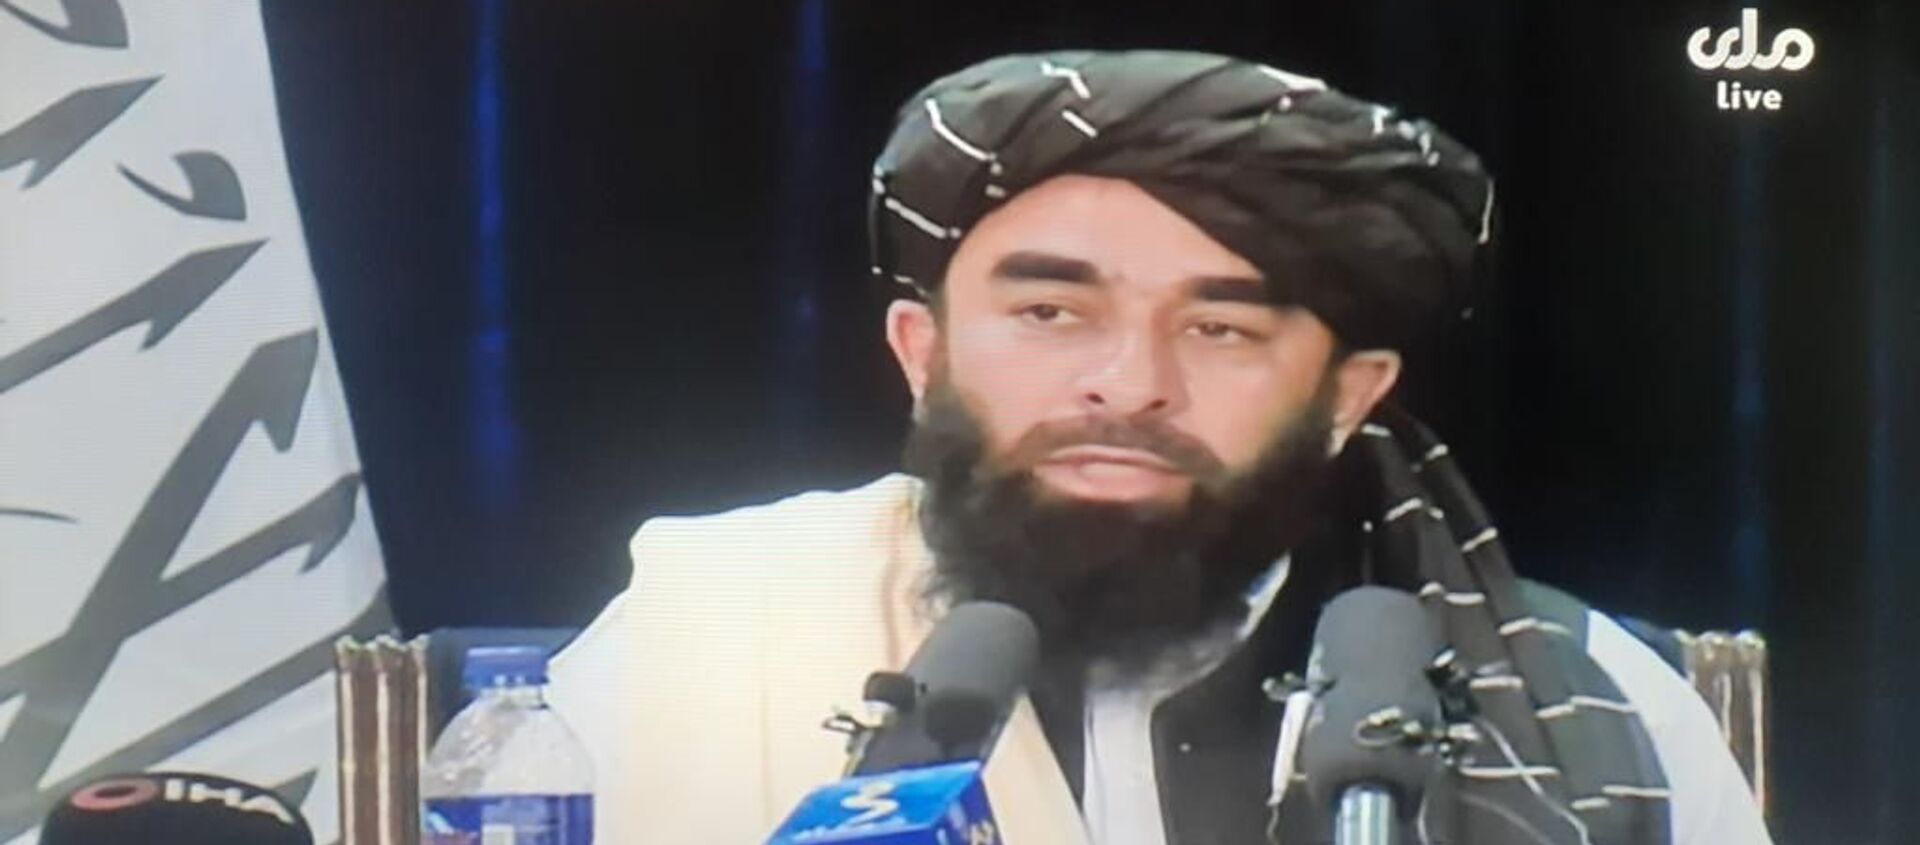 Taliban spokesman Zabihullah Mujahid, in a press conference in Kabul, says they are proud of freeing Afghanistan from occupation - 俄羅斯衛星通訊社, 1920, 17.08.2021